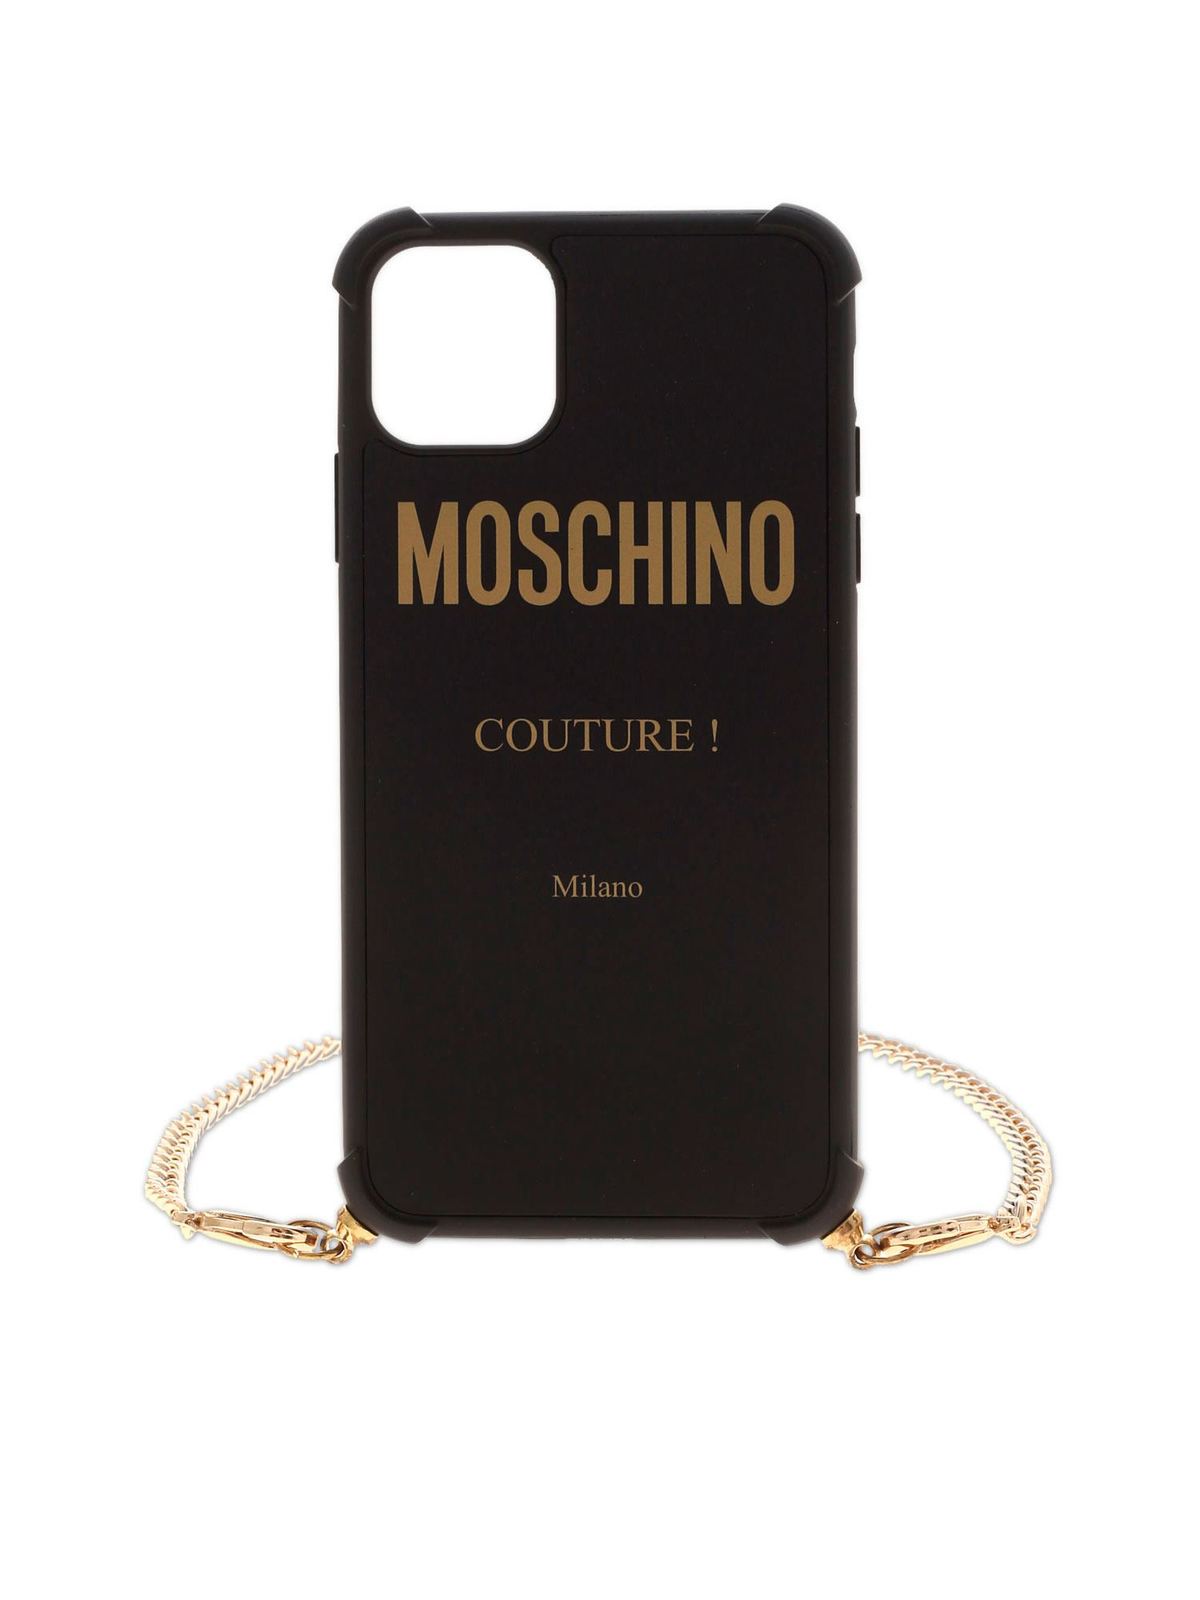 Moschino Iphone 11 Pro Max Black Cover With Moschino L Cases Covers